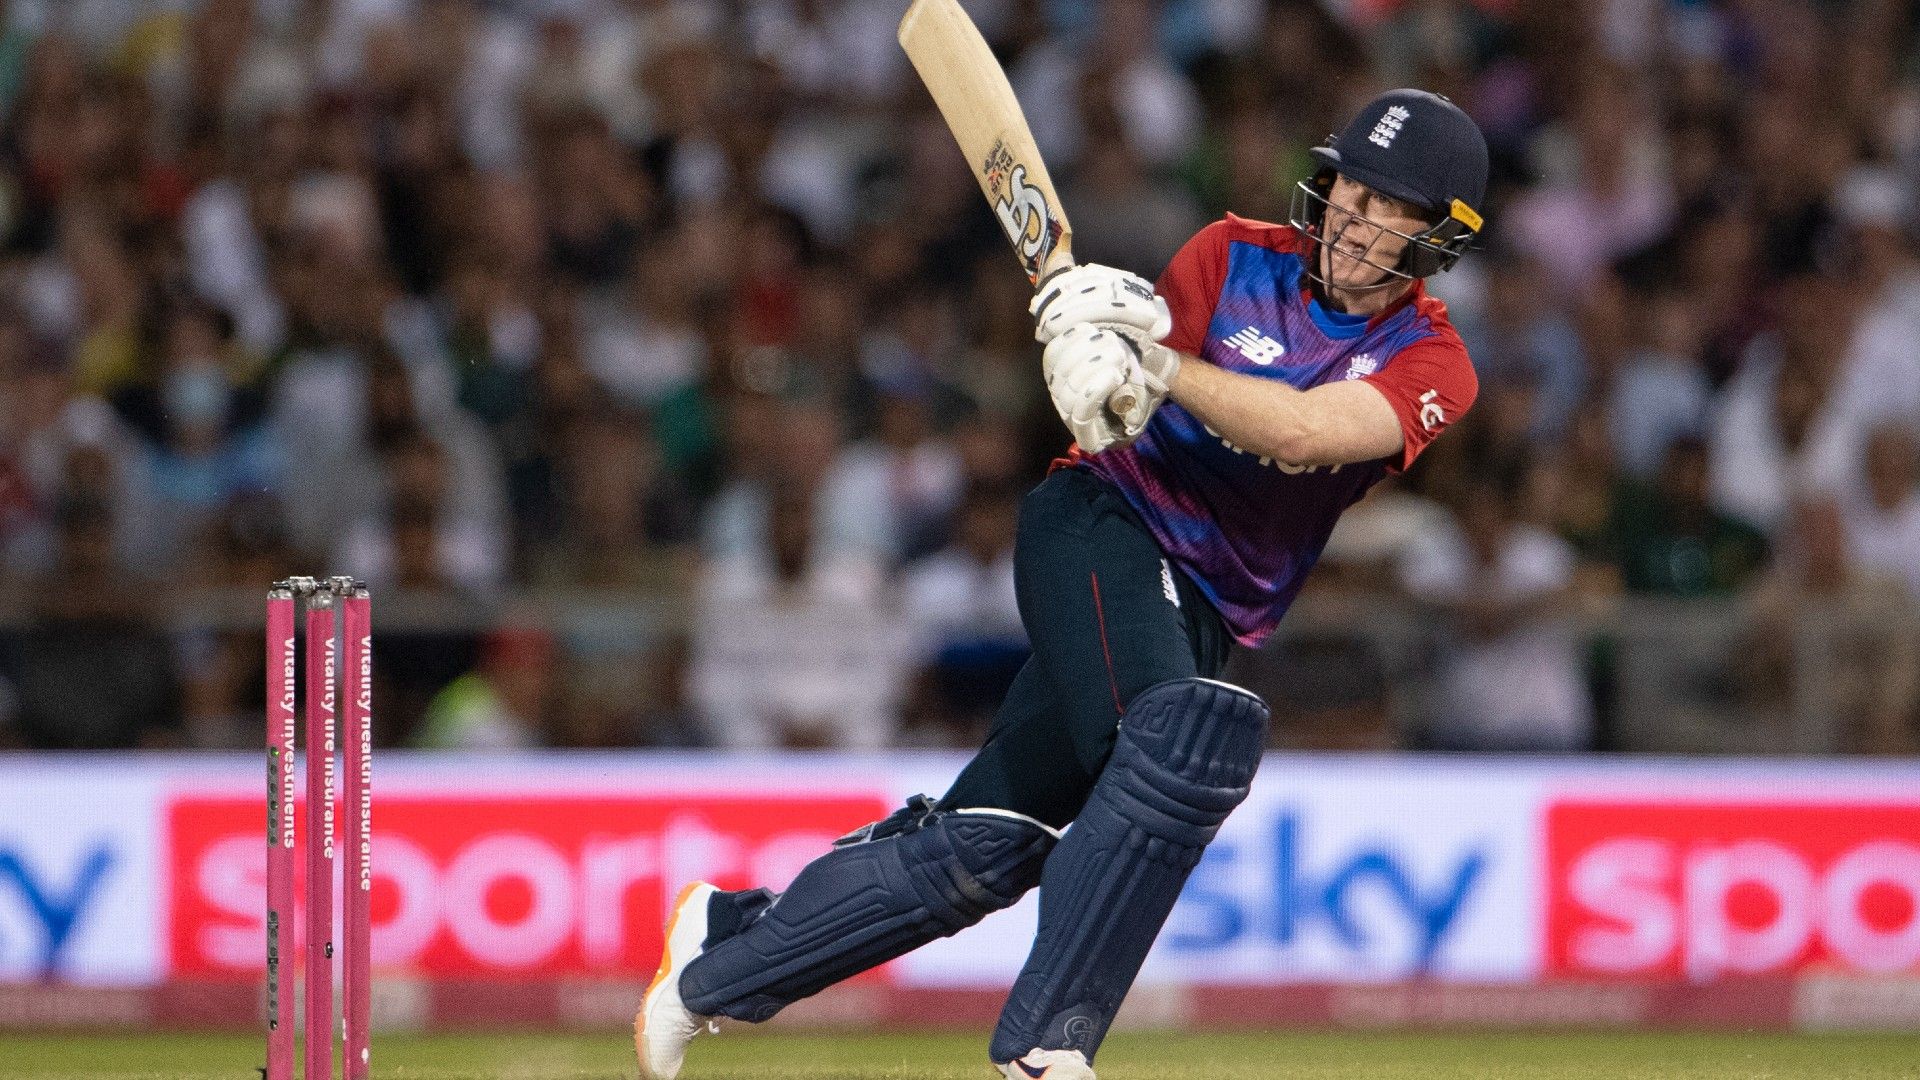 England T20 captain Eoin Morgan says he'll drop himself if needed during the World Cup